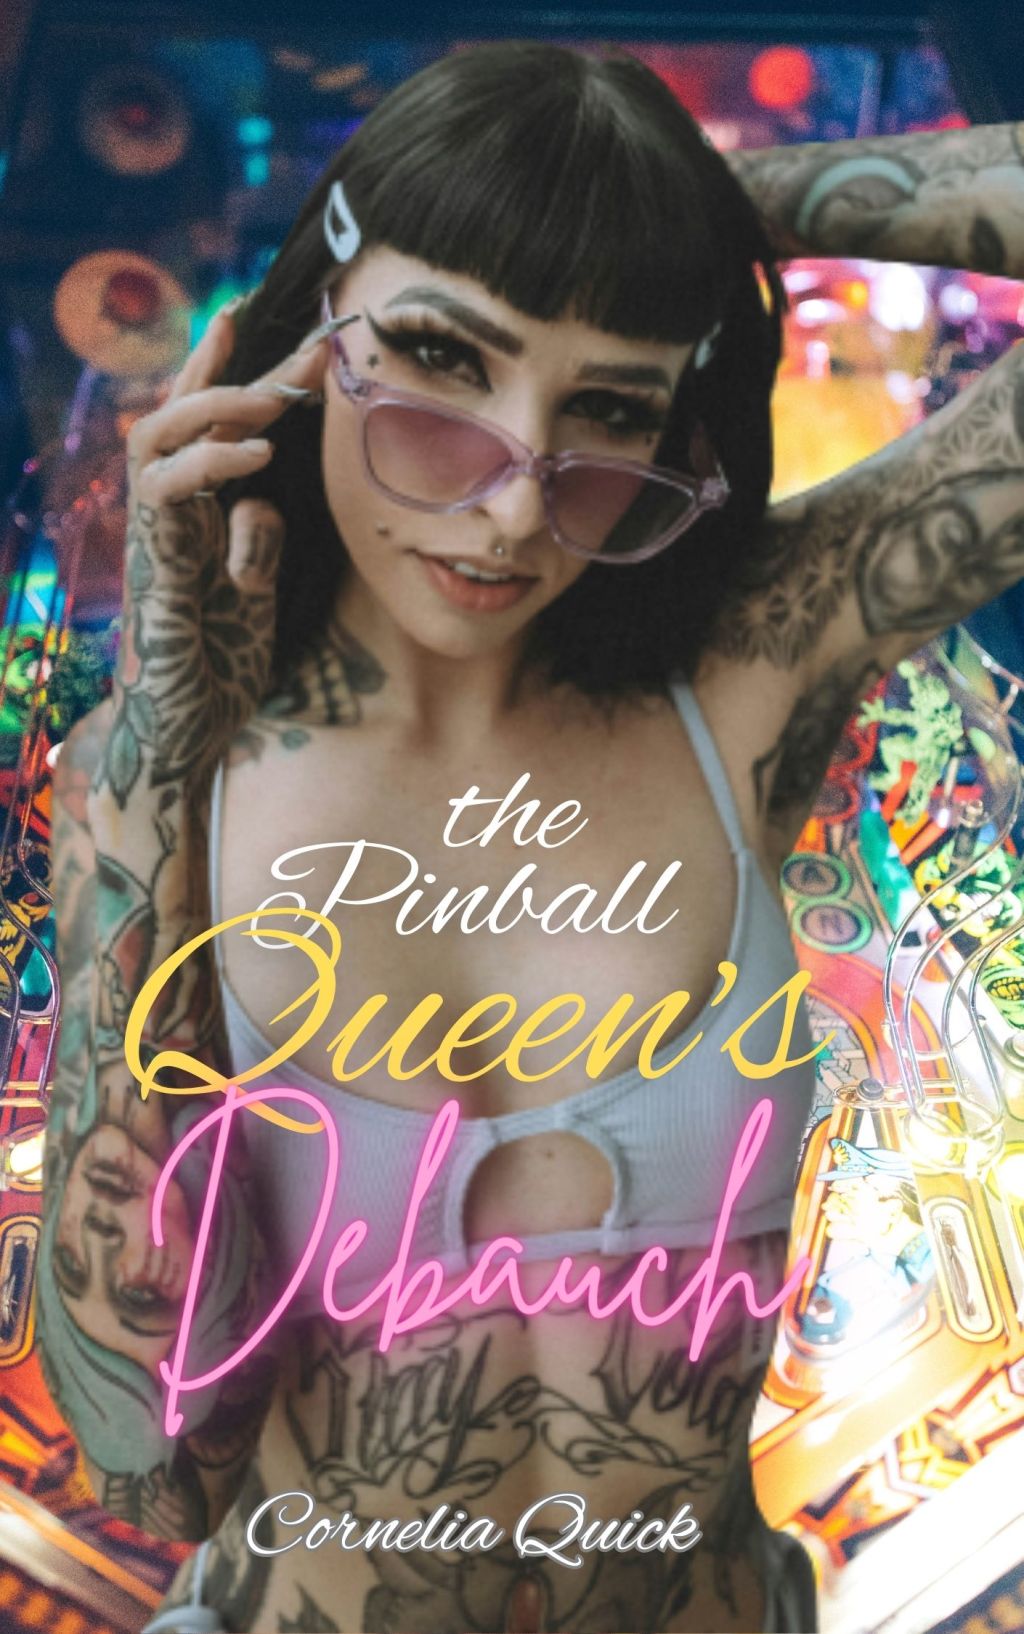 Get “The Pinball Queen’s Debauch” for 99 cents